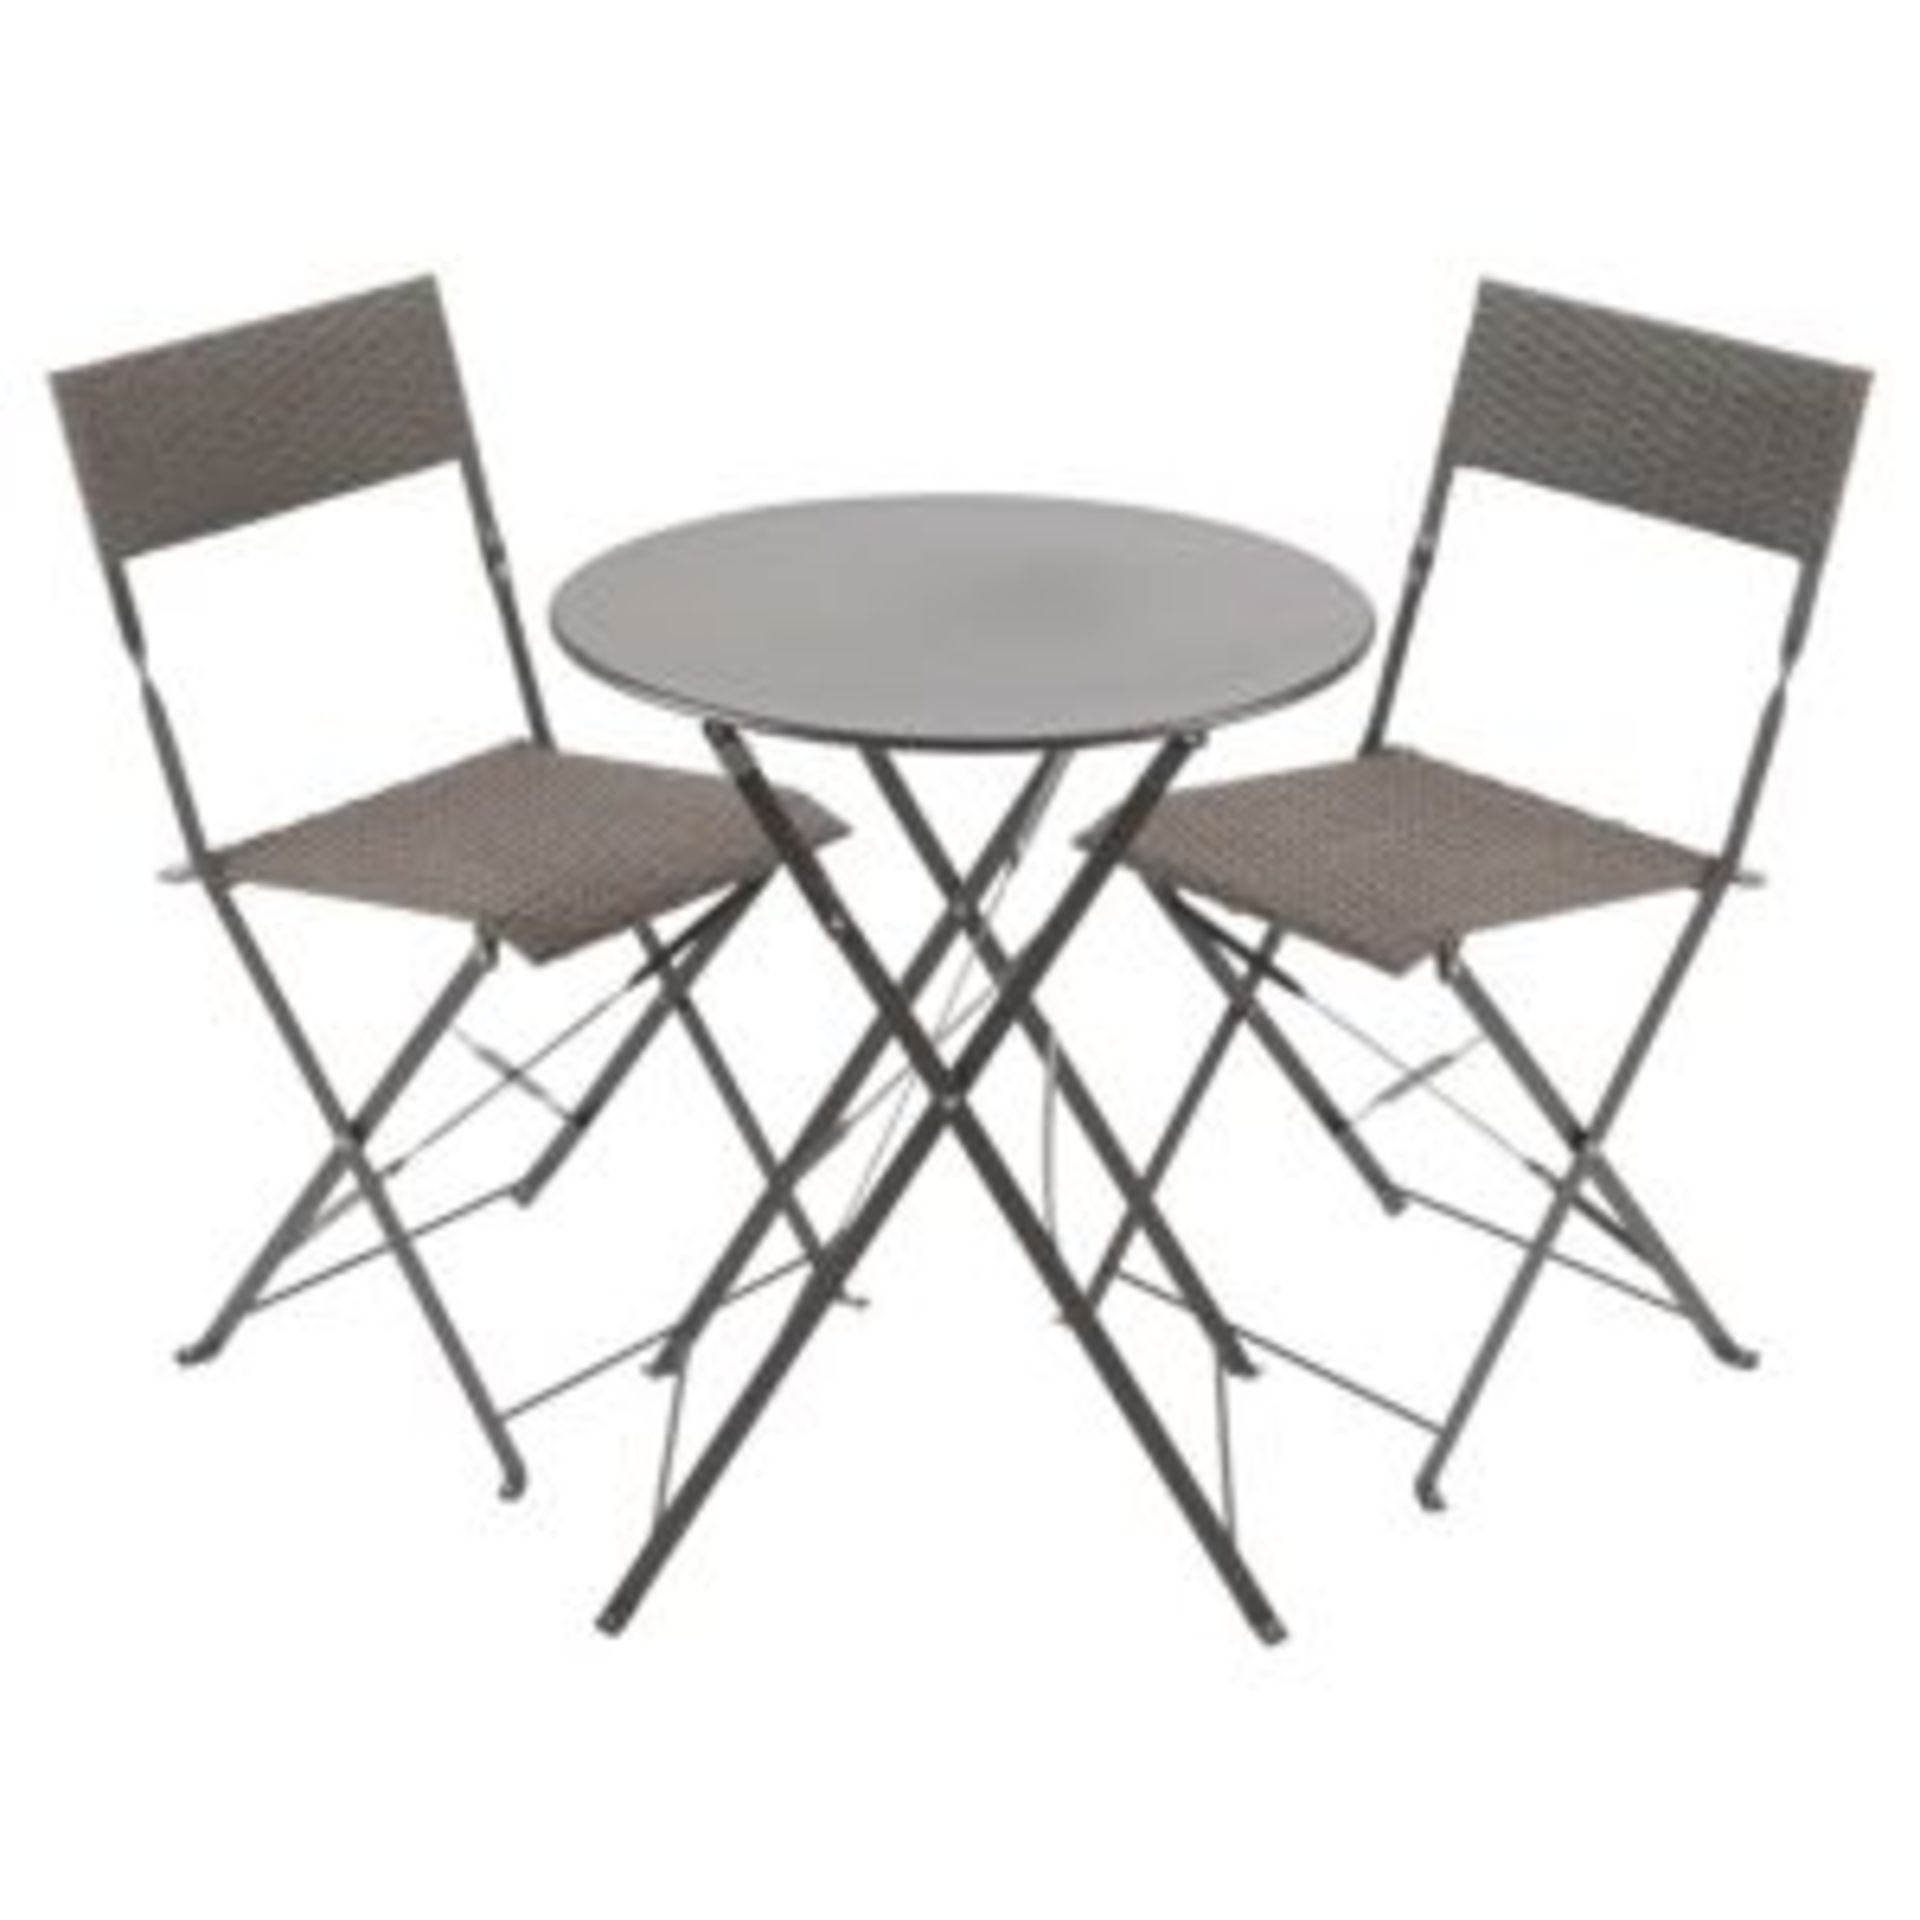 V Brand New Atlas Rattan Folding Bistro Set - Metal Table - Two Chairs - ISP £91.99